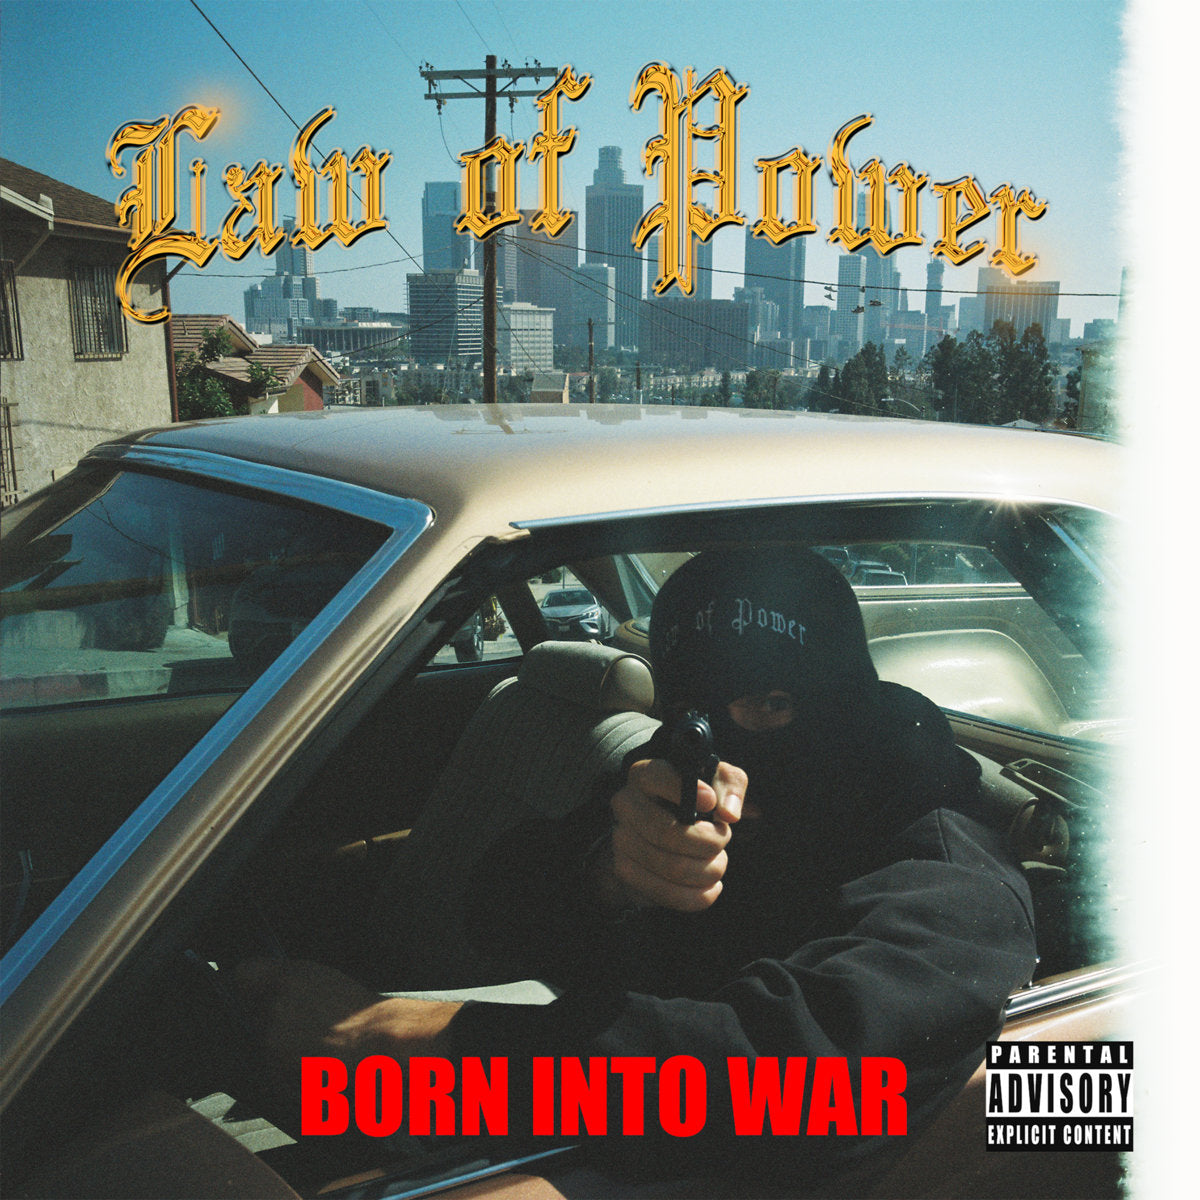 LAW OF POWER "Born Into War" Tape